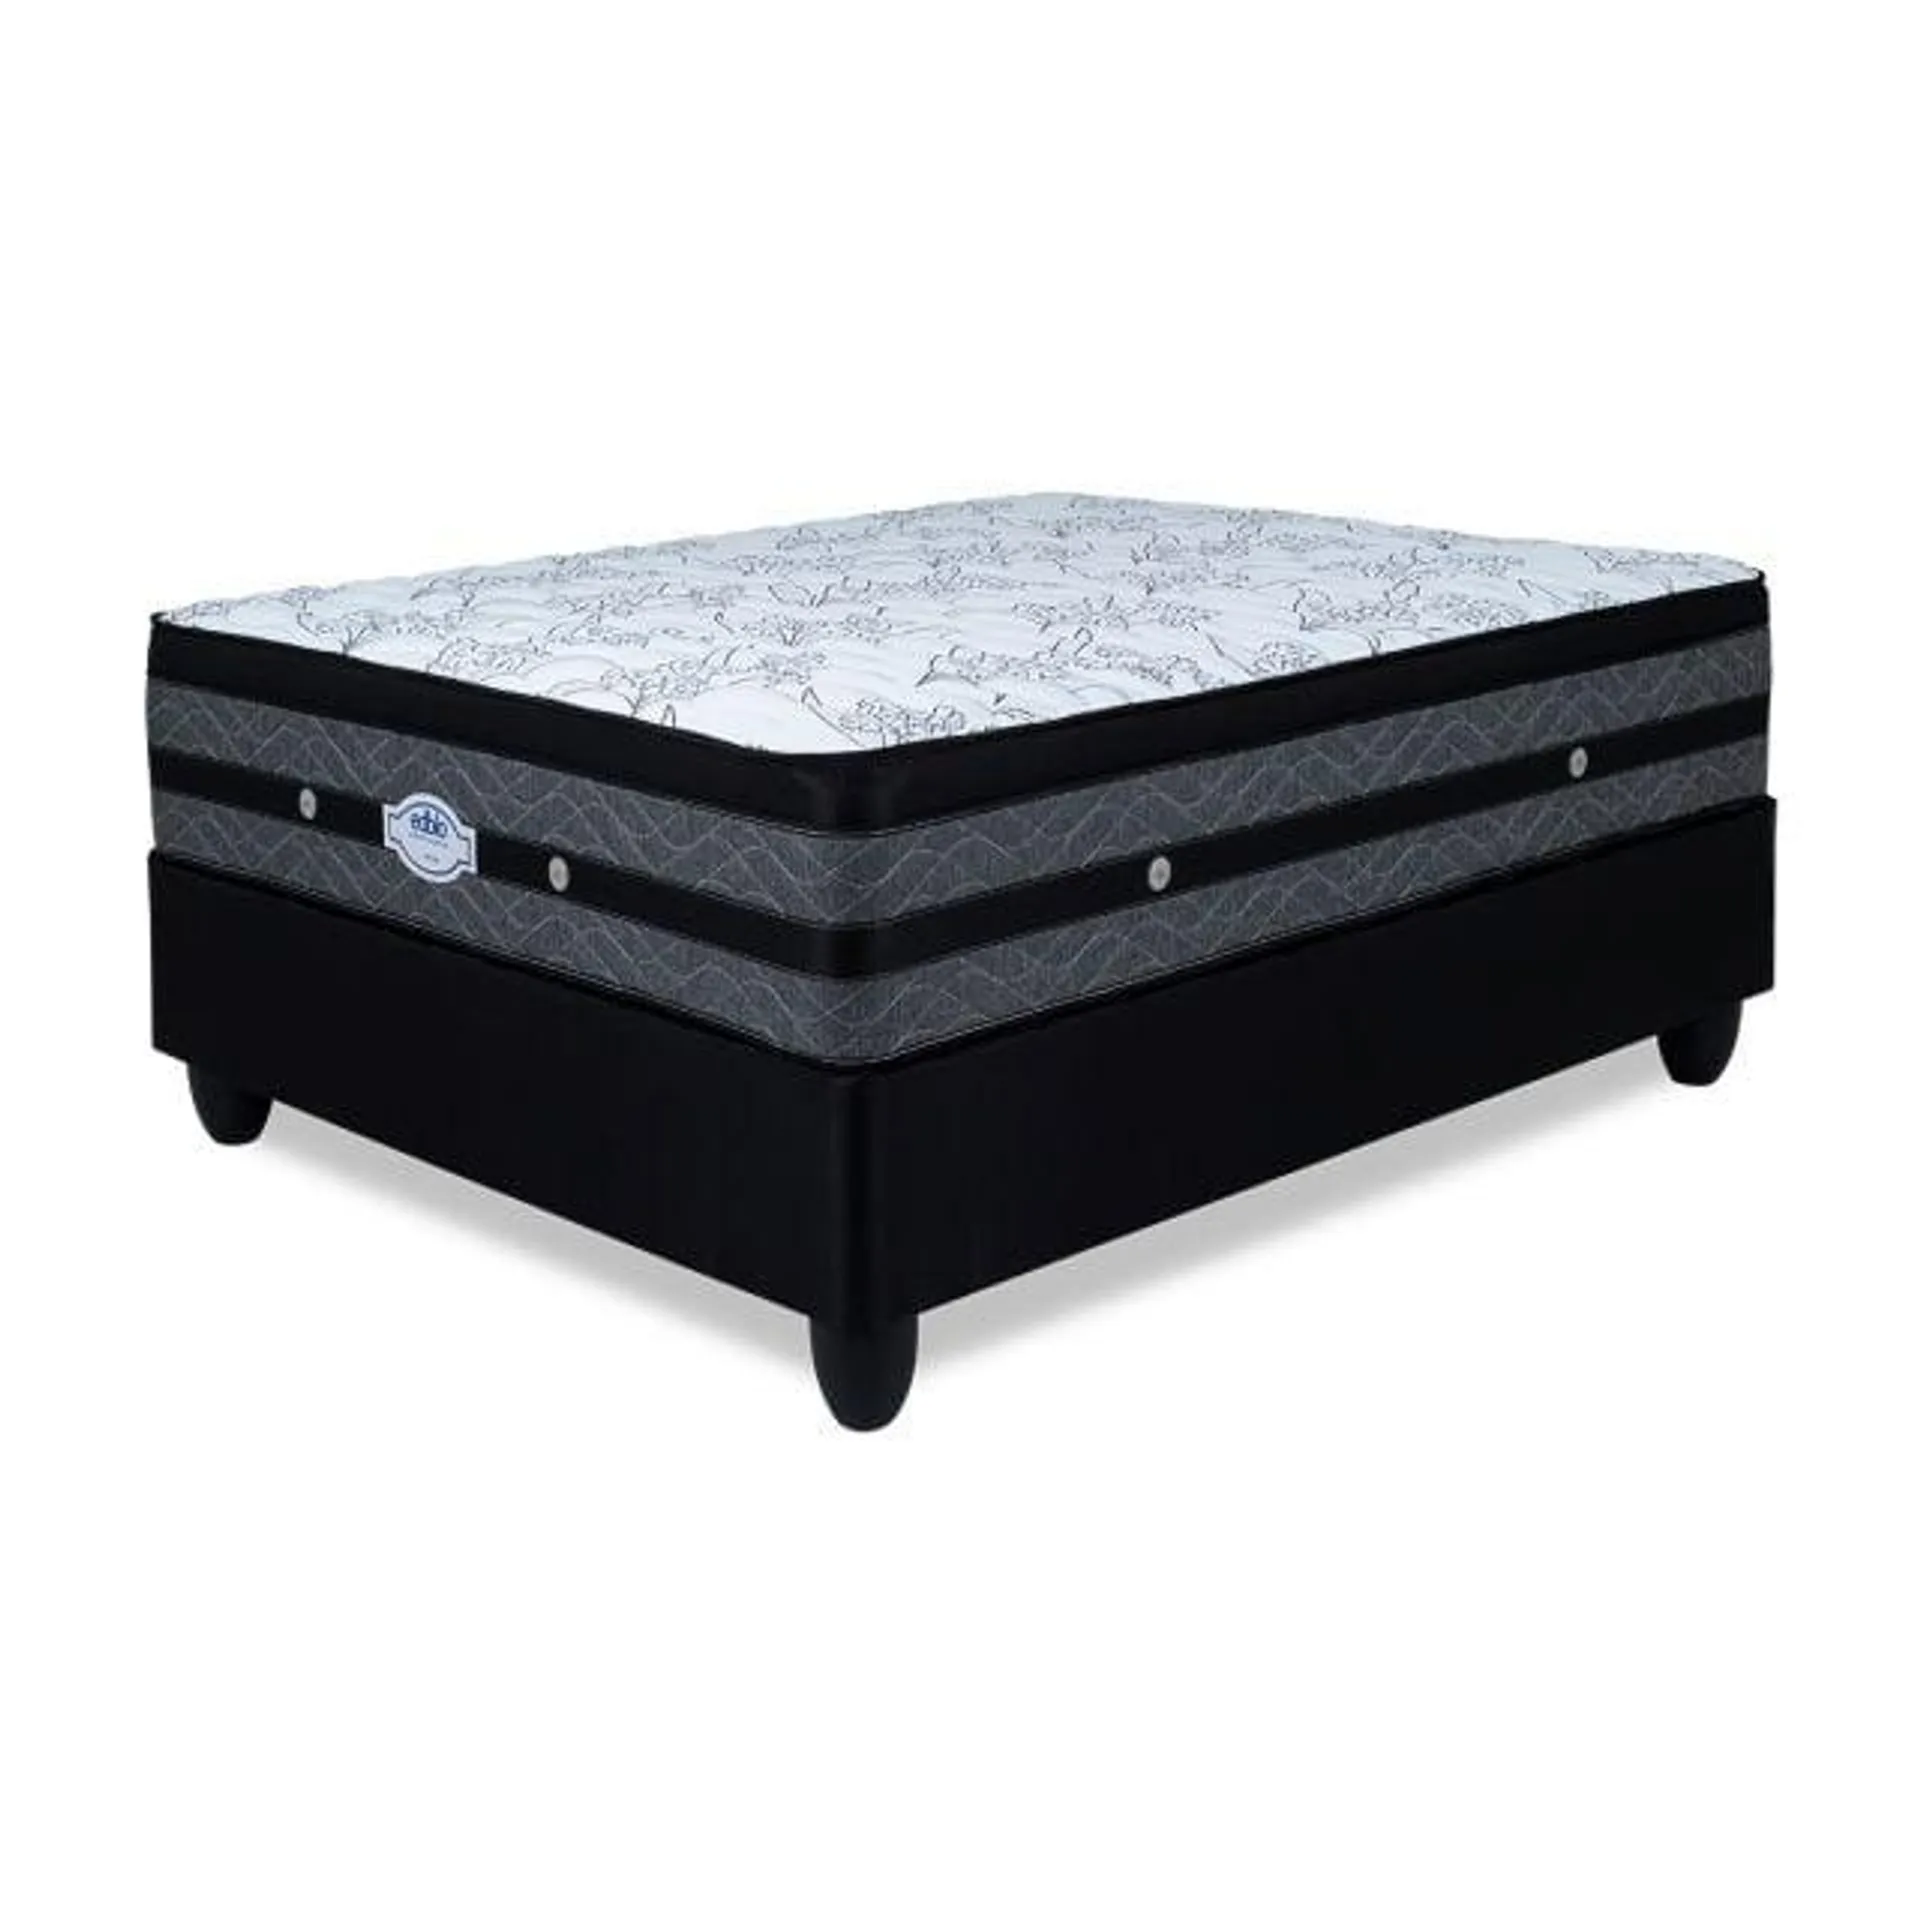 Edblo Darcy Double Support Queen Mattress and Bed Set